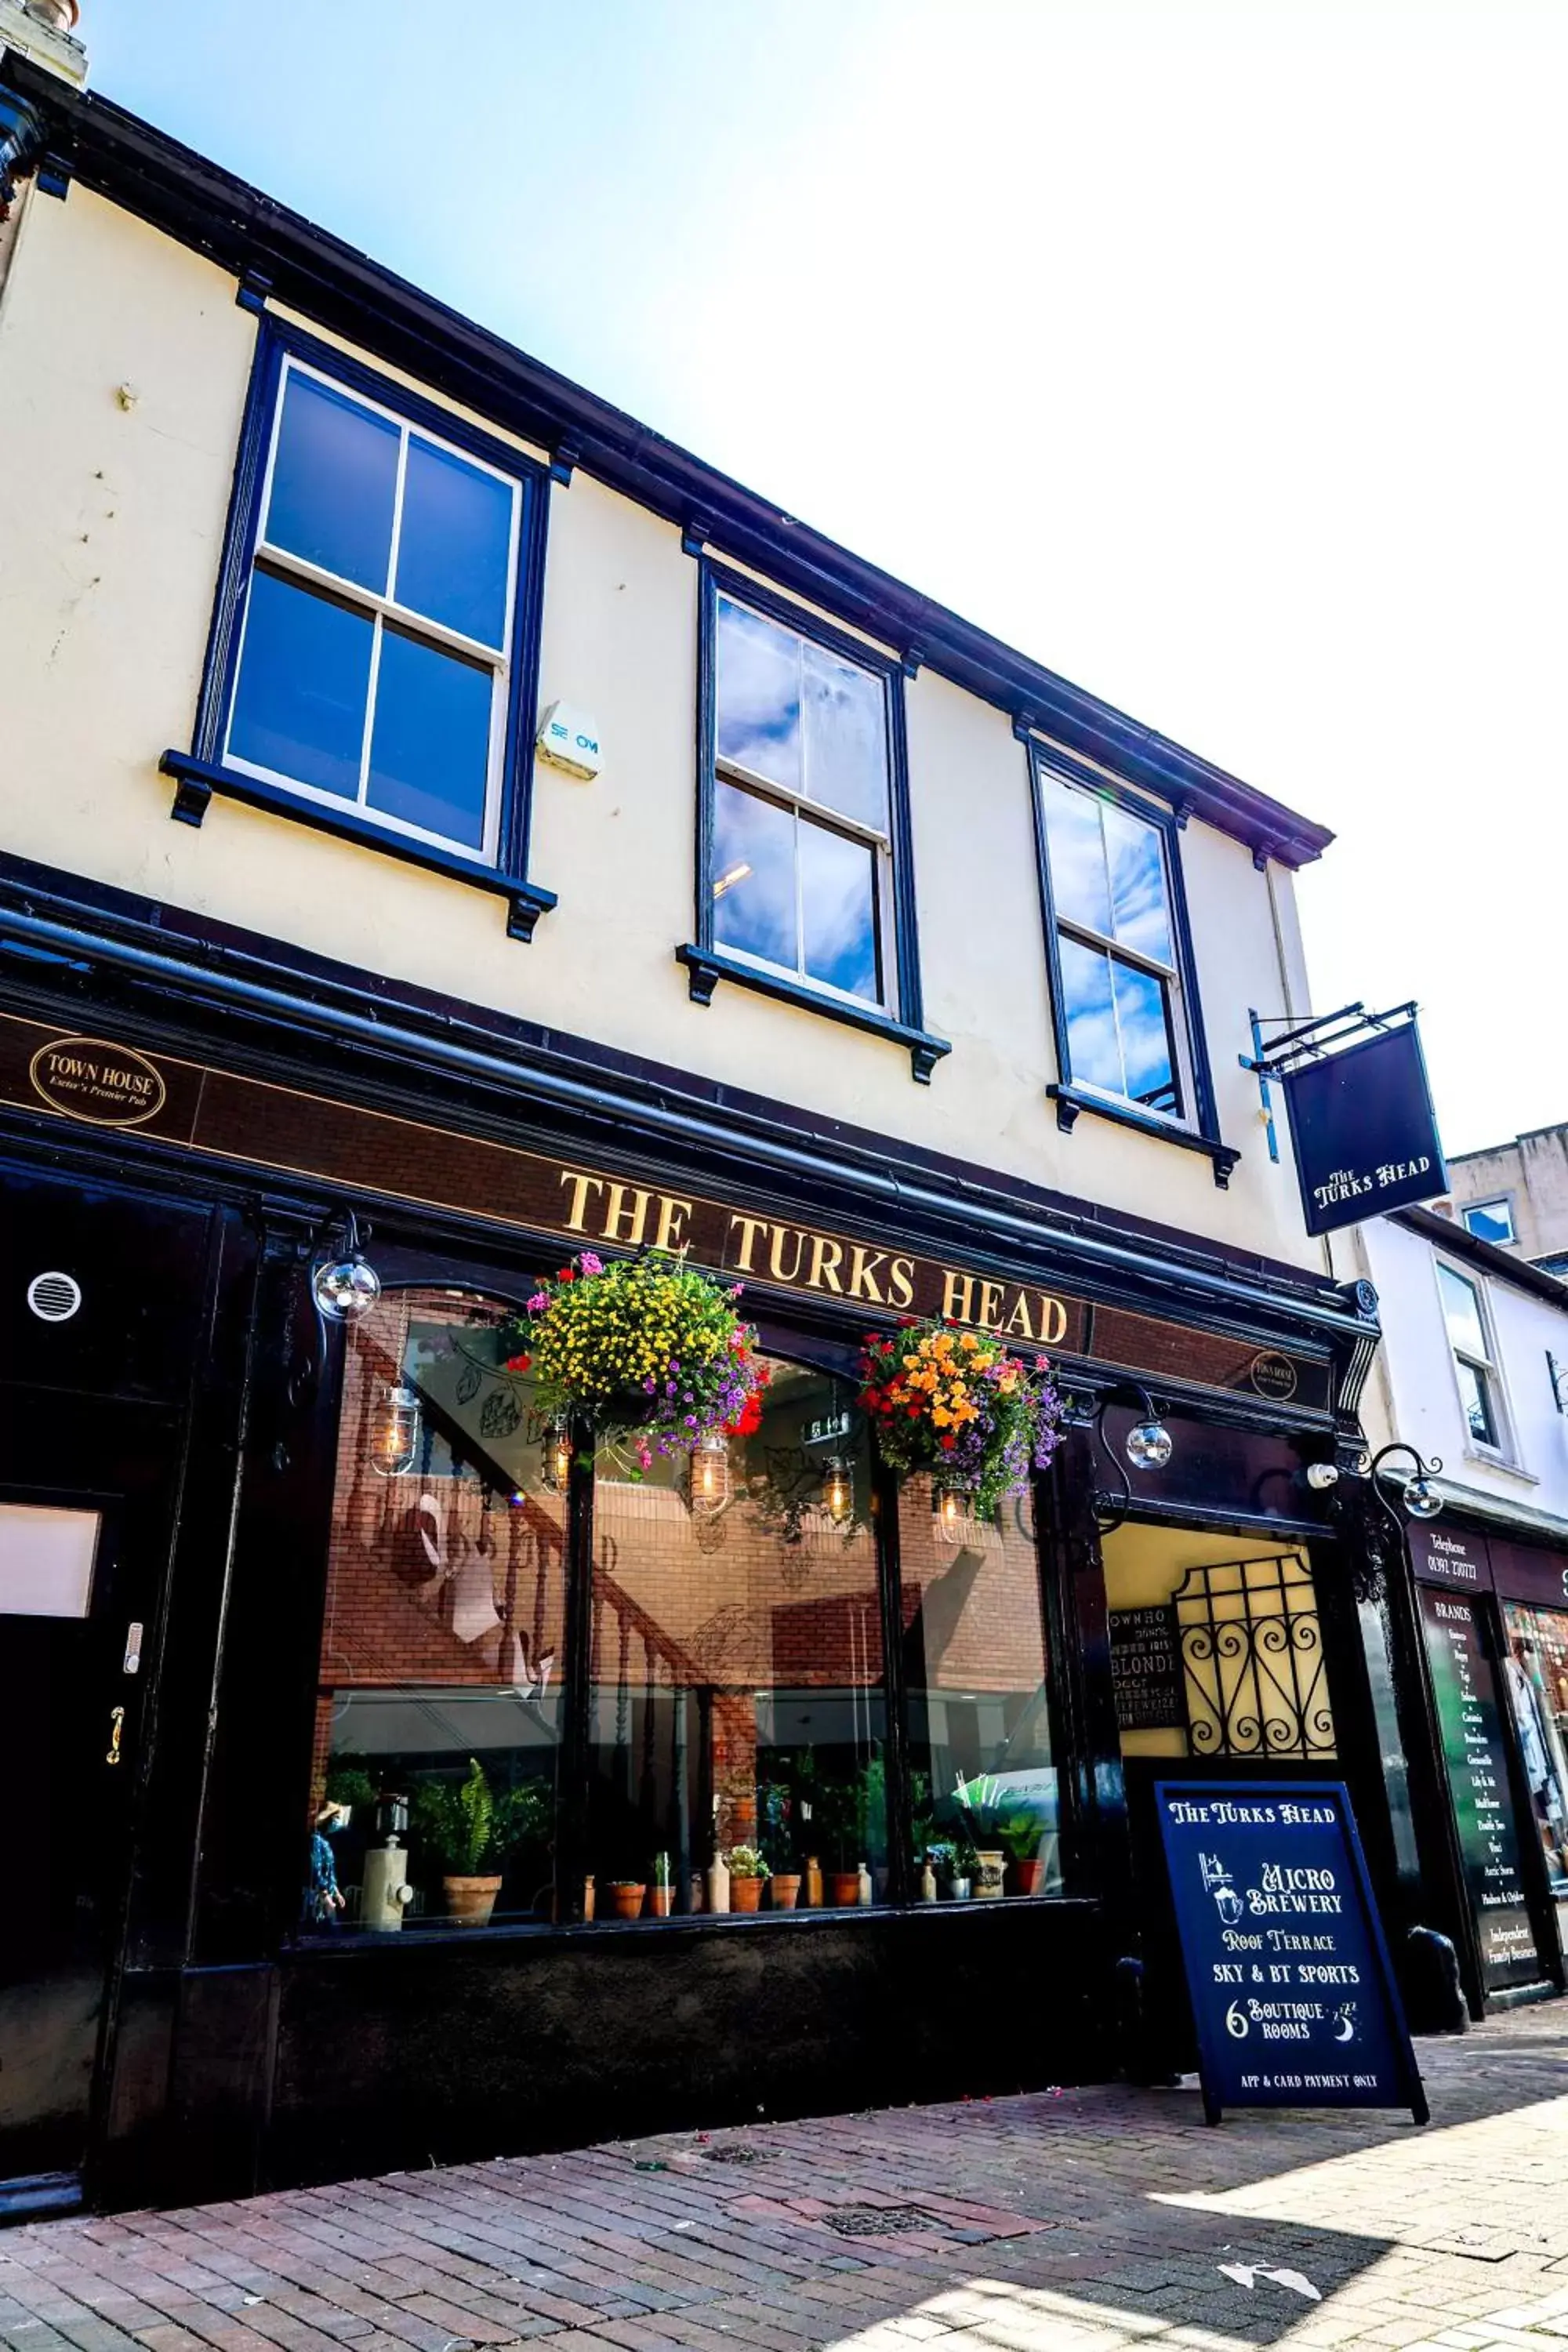 Property Building in The Turks Head